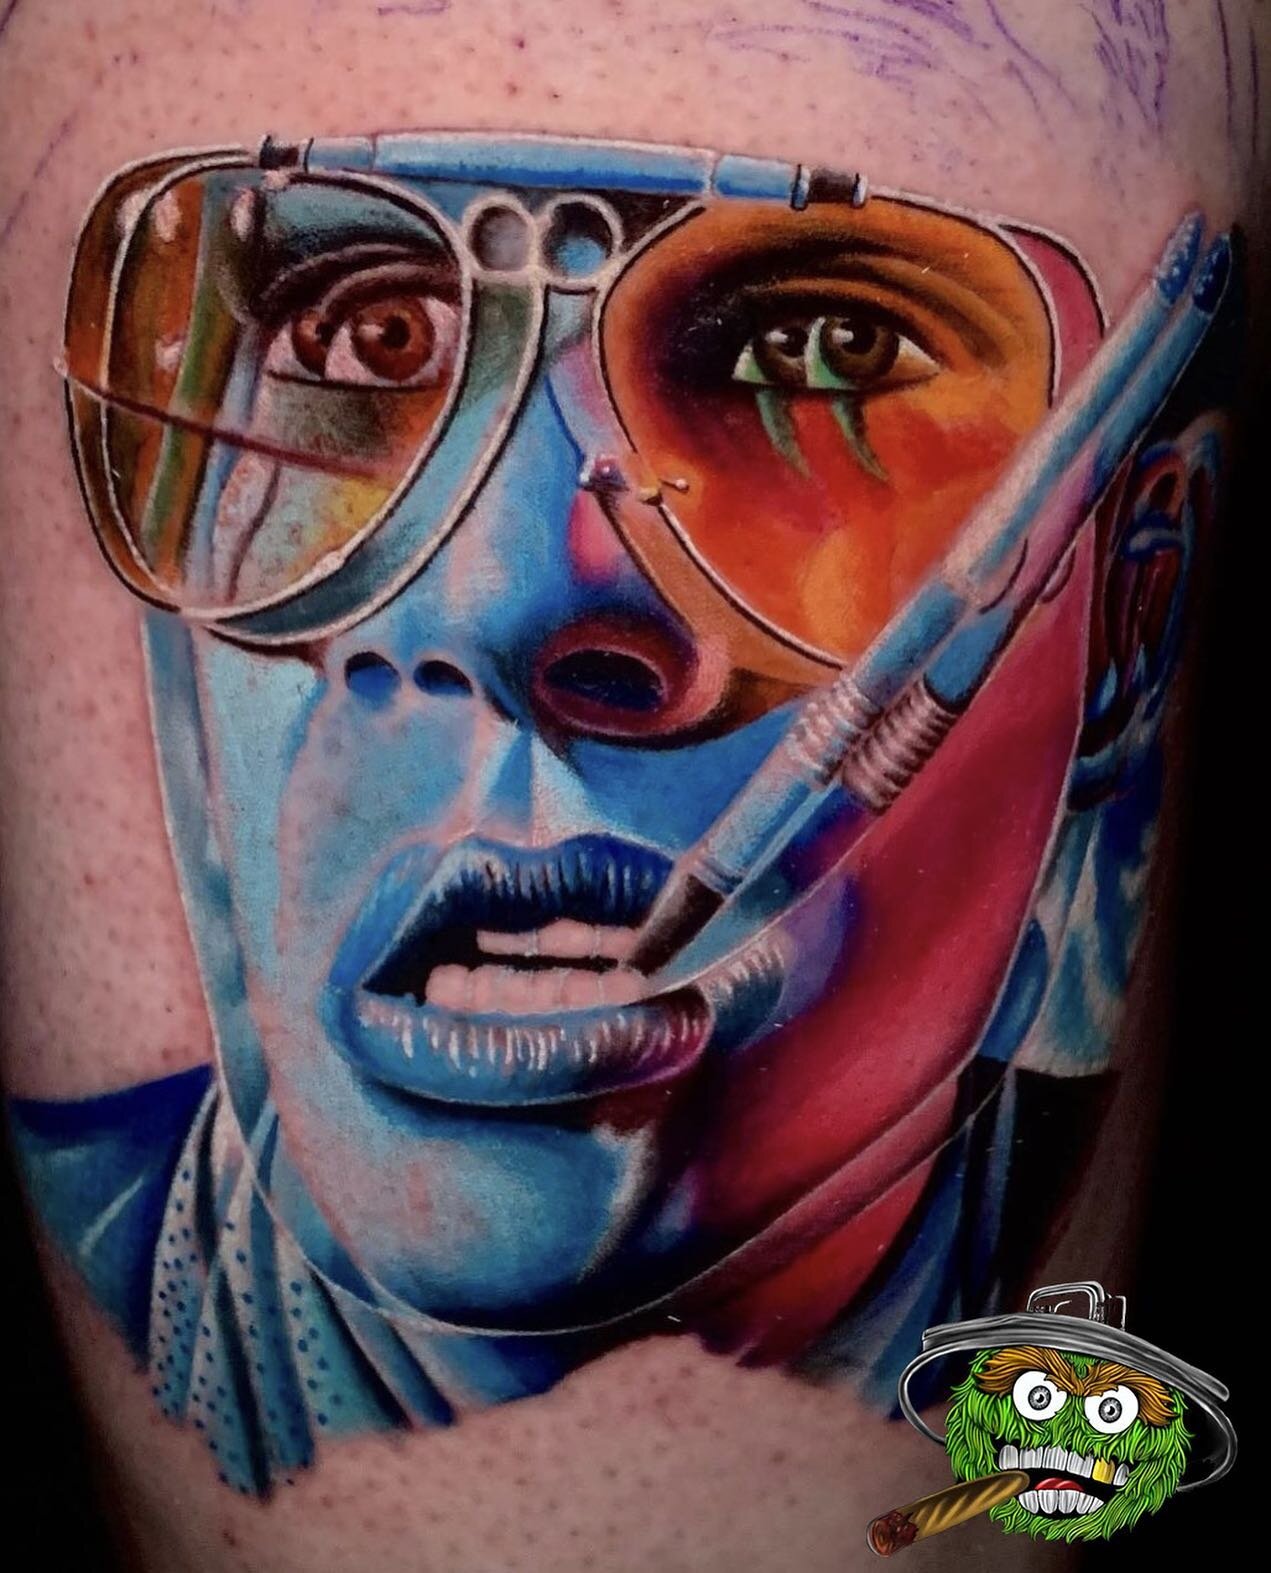 Fear and Loathing piece done by @mrgrouchtattoos. Come by for a free consultation and get your next tattoo scheduled now!

@mrgrouchtattoos
@satoritattoocollective

#fearandloathing #johnnydepp #colorrealism #realism #portrait #portraitartist #texasp